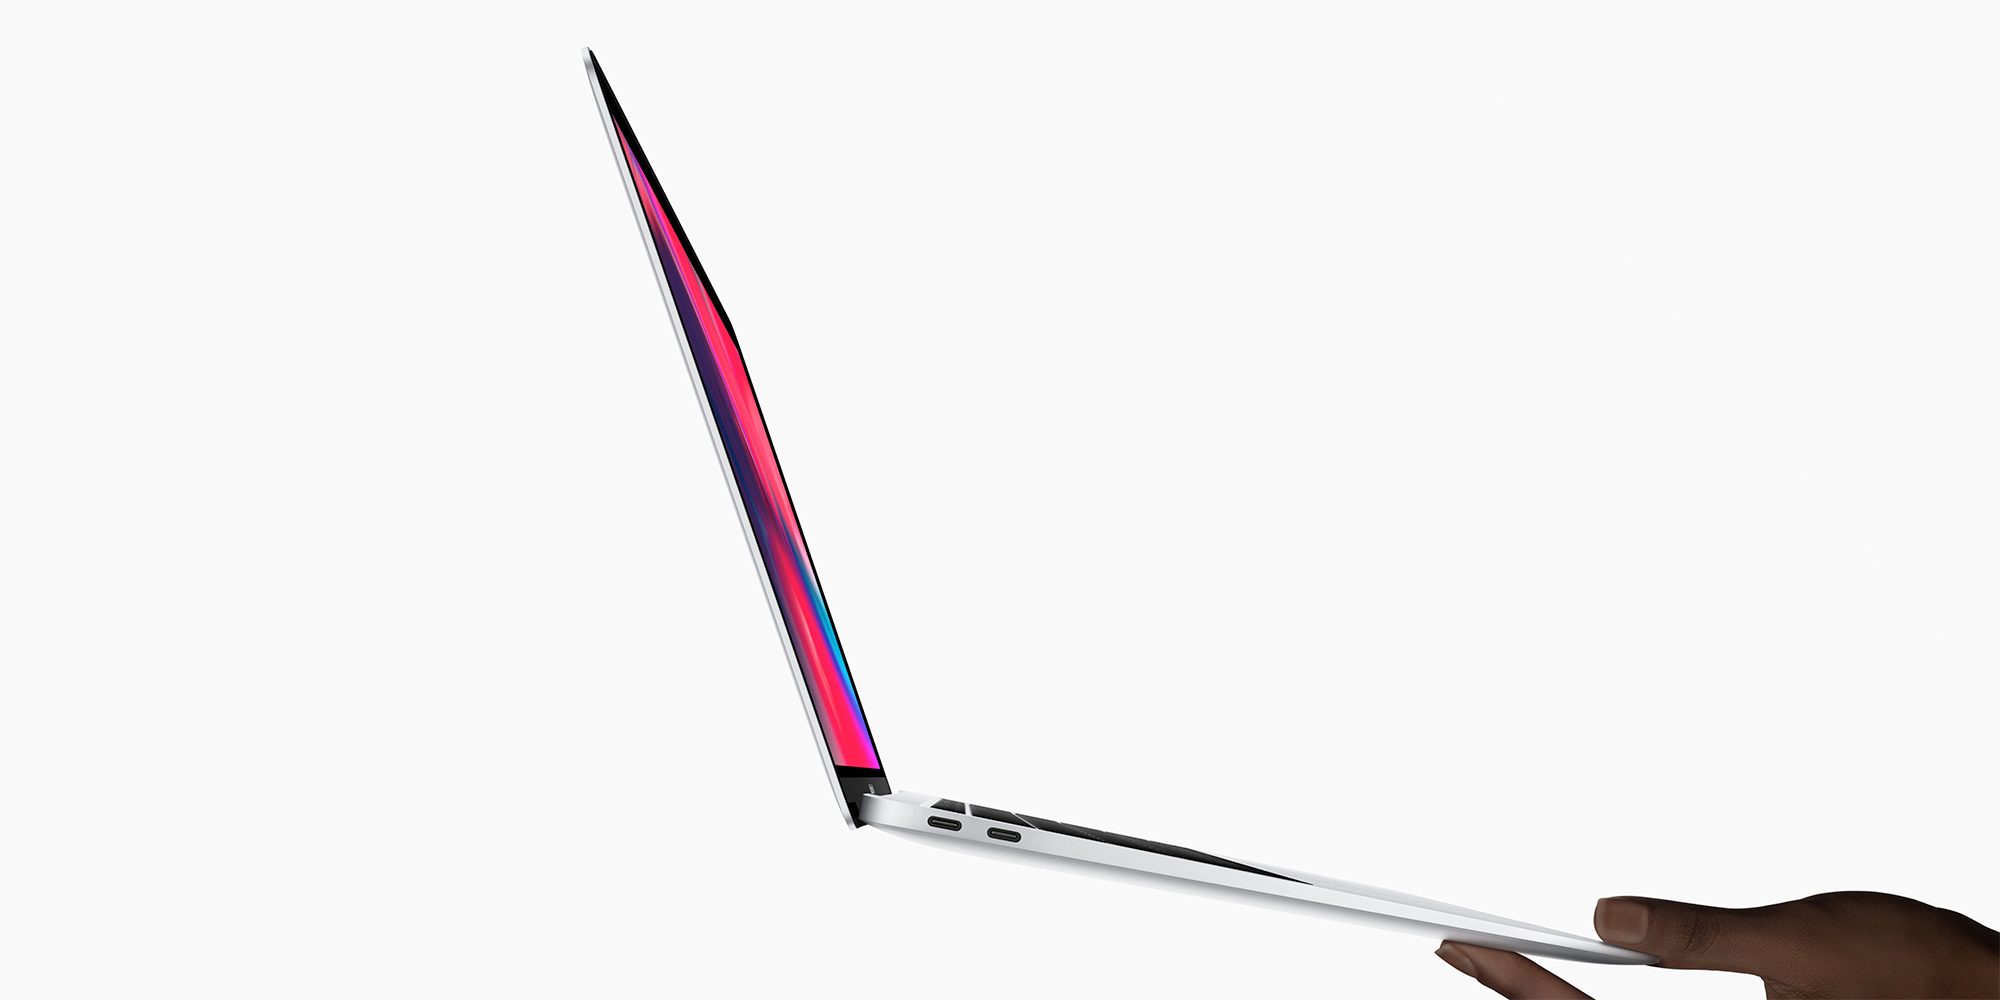 Apple's 2019 13-inch MacBook Air gets $200 cut, priced from $900 